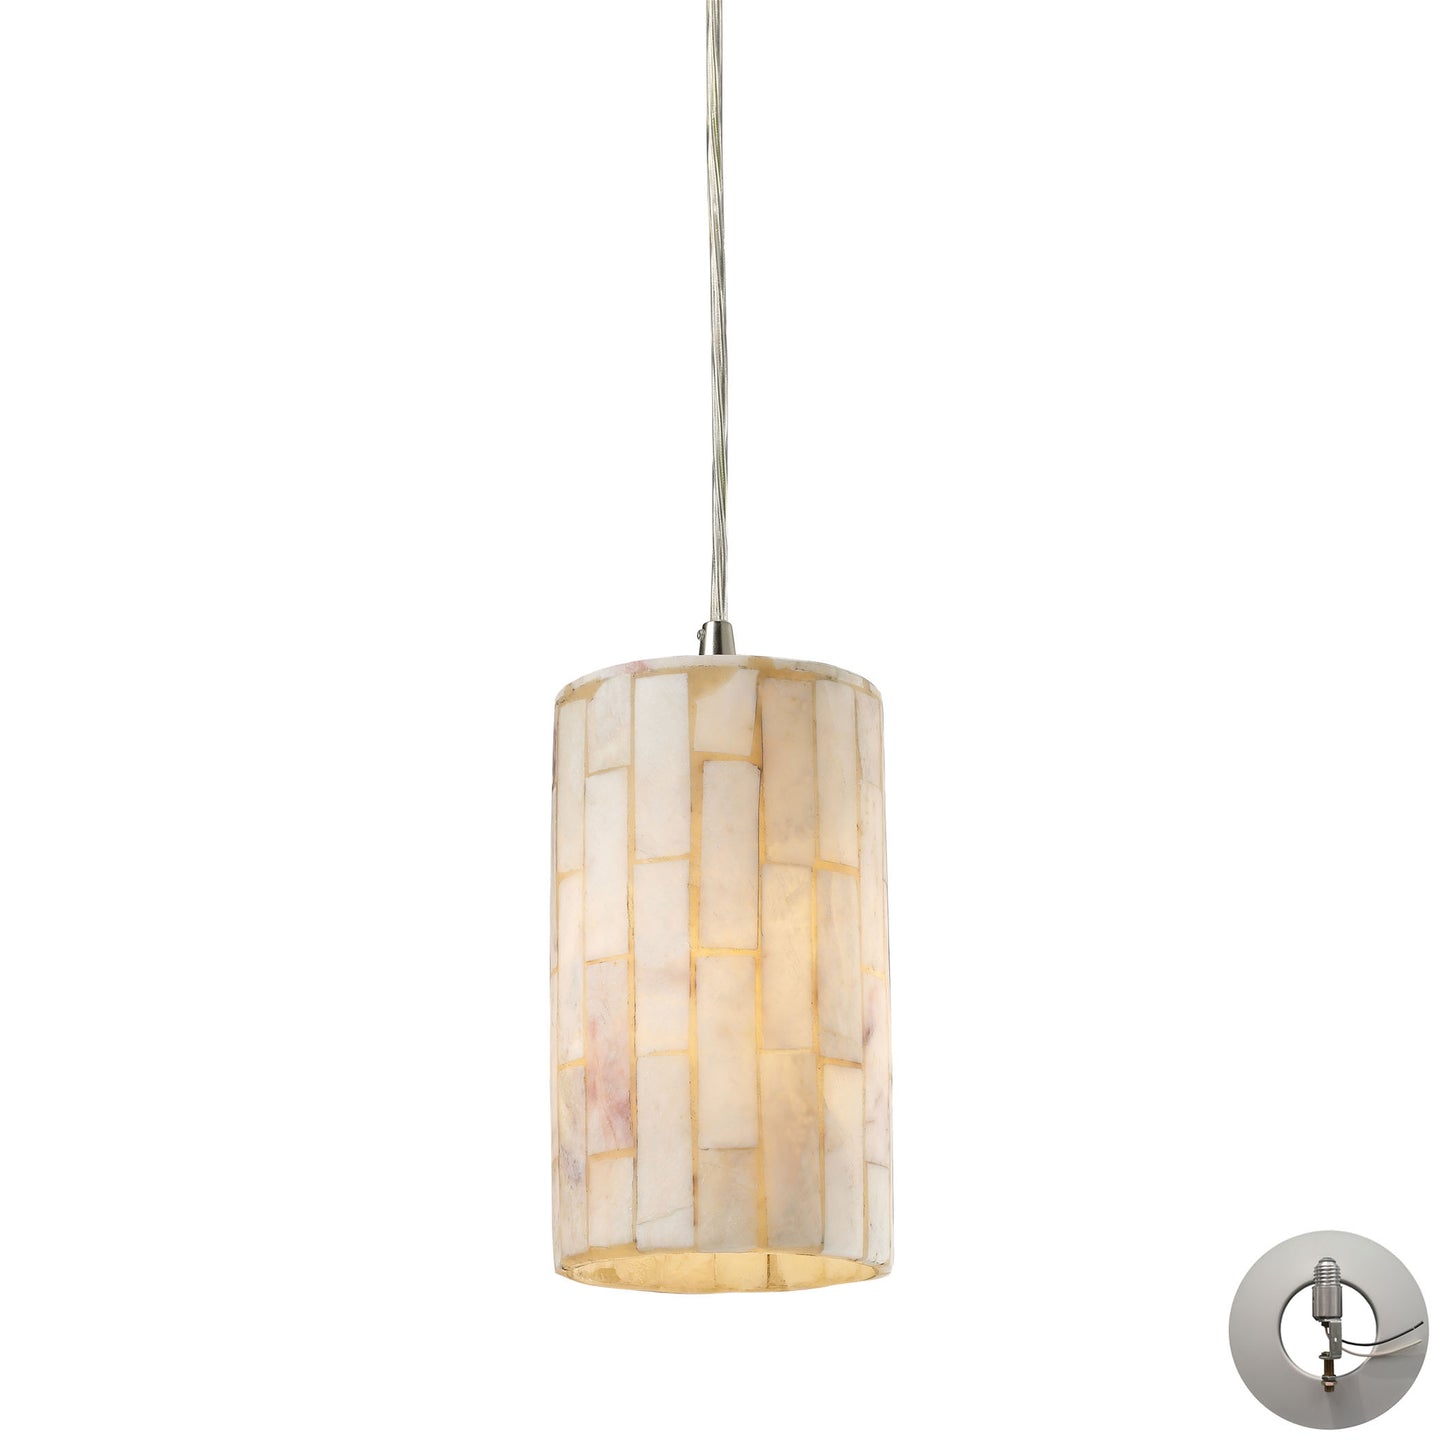 Coletta 1-Light Mini Pendant in Satin Nickel with Genuine Stone Shade - Includes Adapter Kit